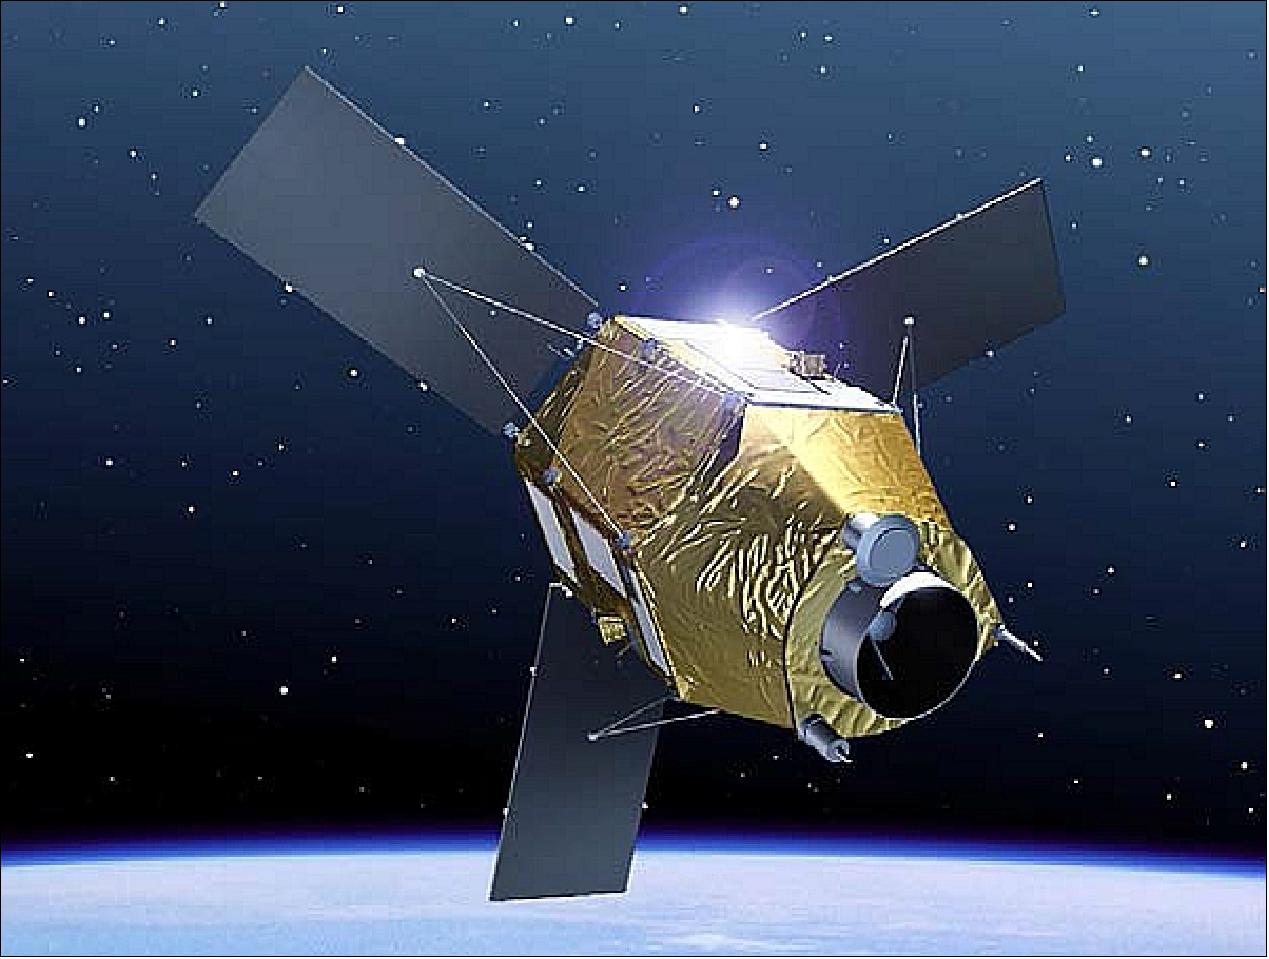 Figure 1: Artist's rendition of the deployed Pleiades spacecraft (image credit: CNES)